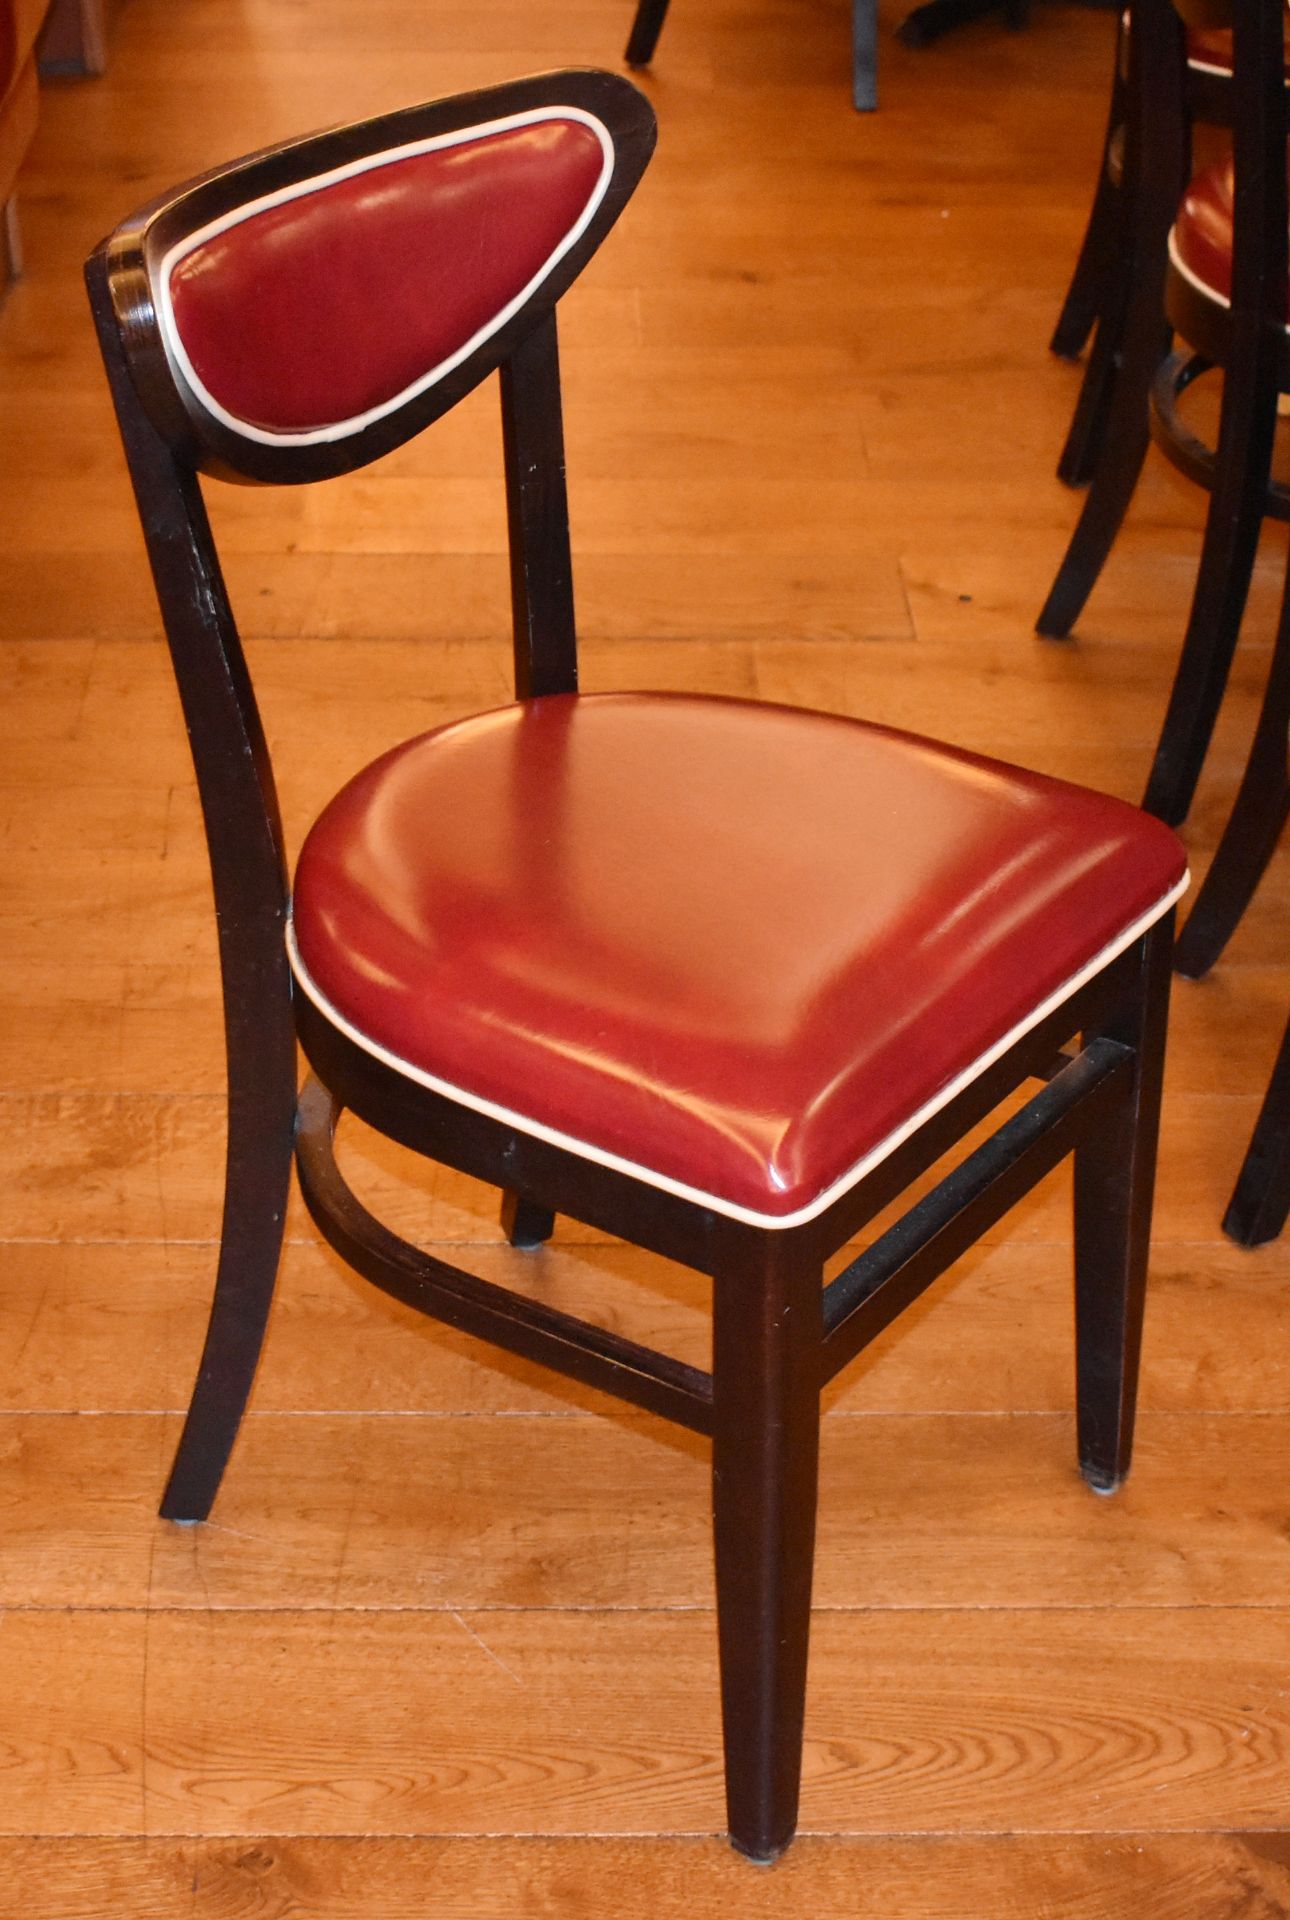 4 x American Diner Restaurant Chairs - Features Red Faux Leather Upholstery and White Piping - - Image 3 of 4